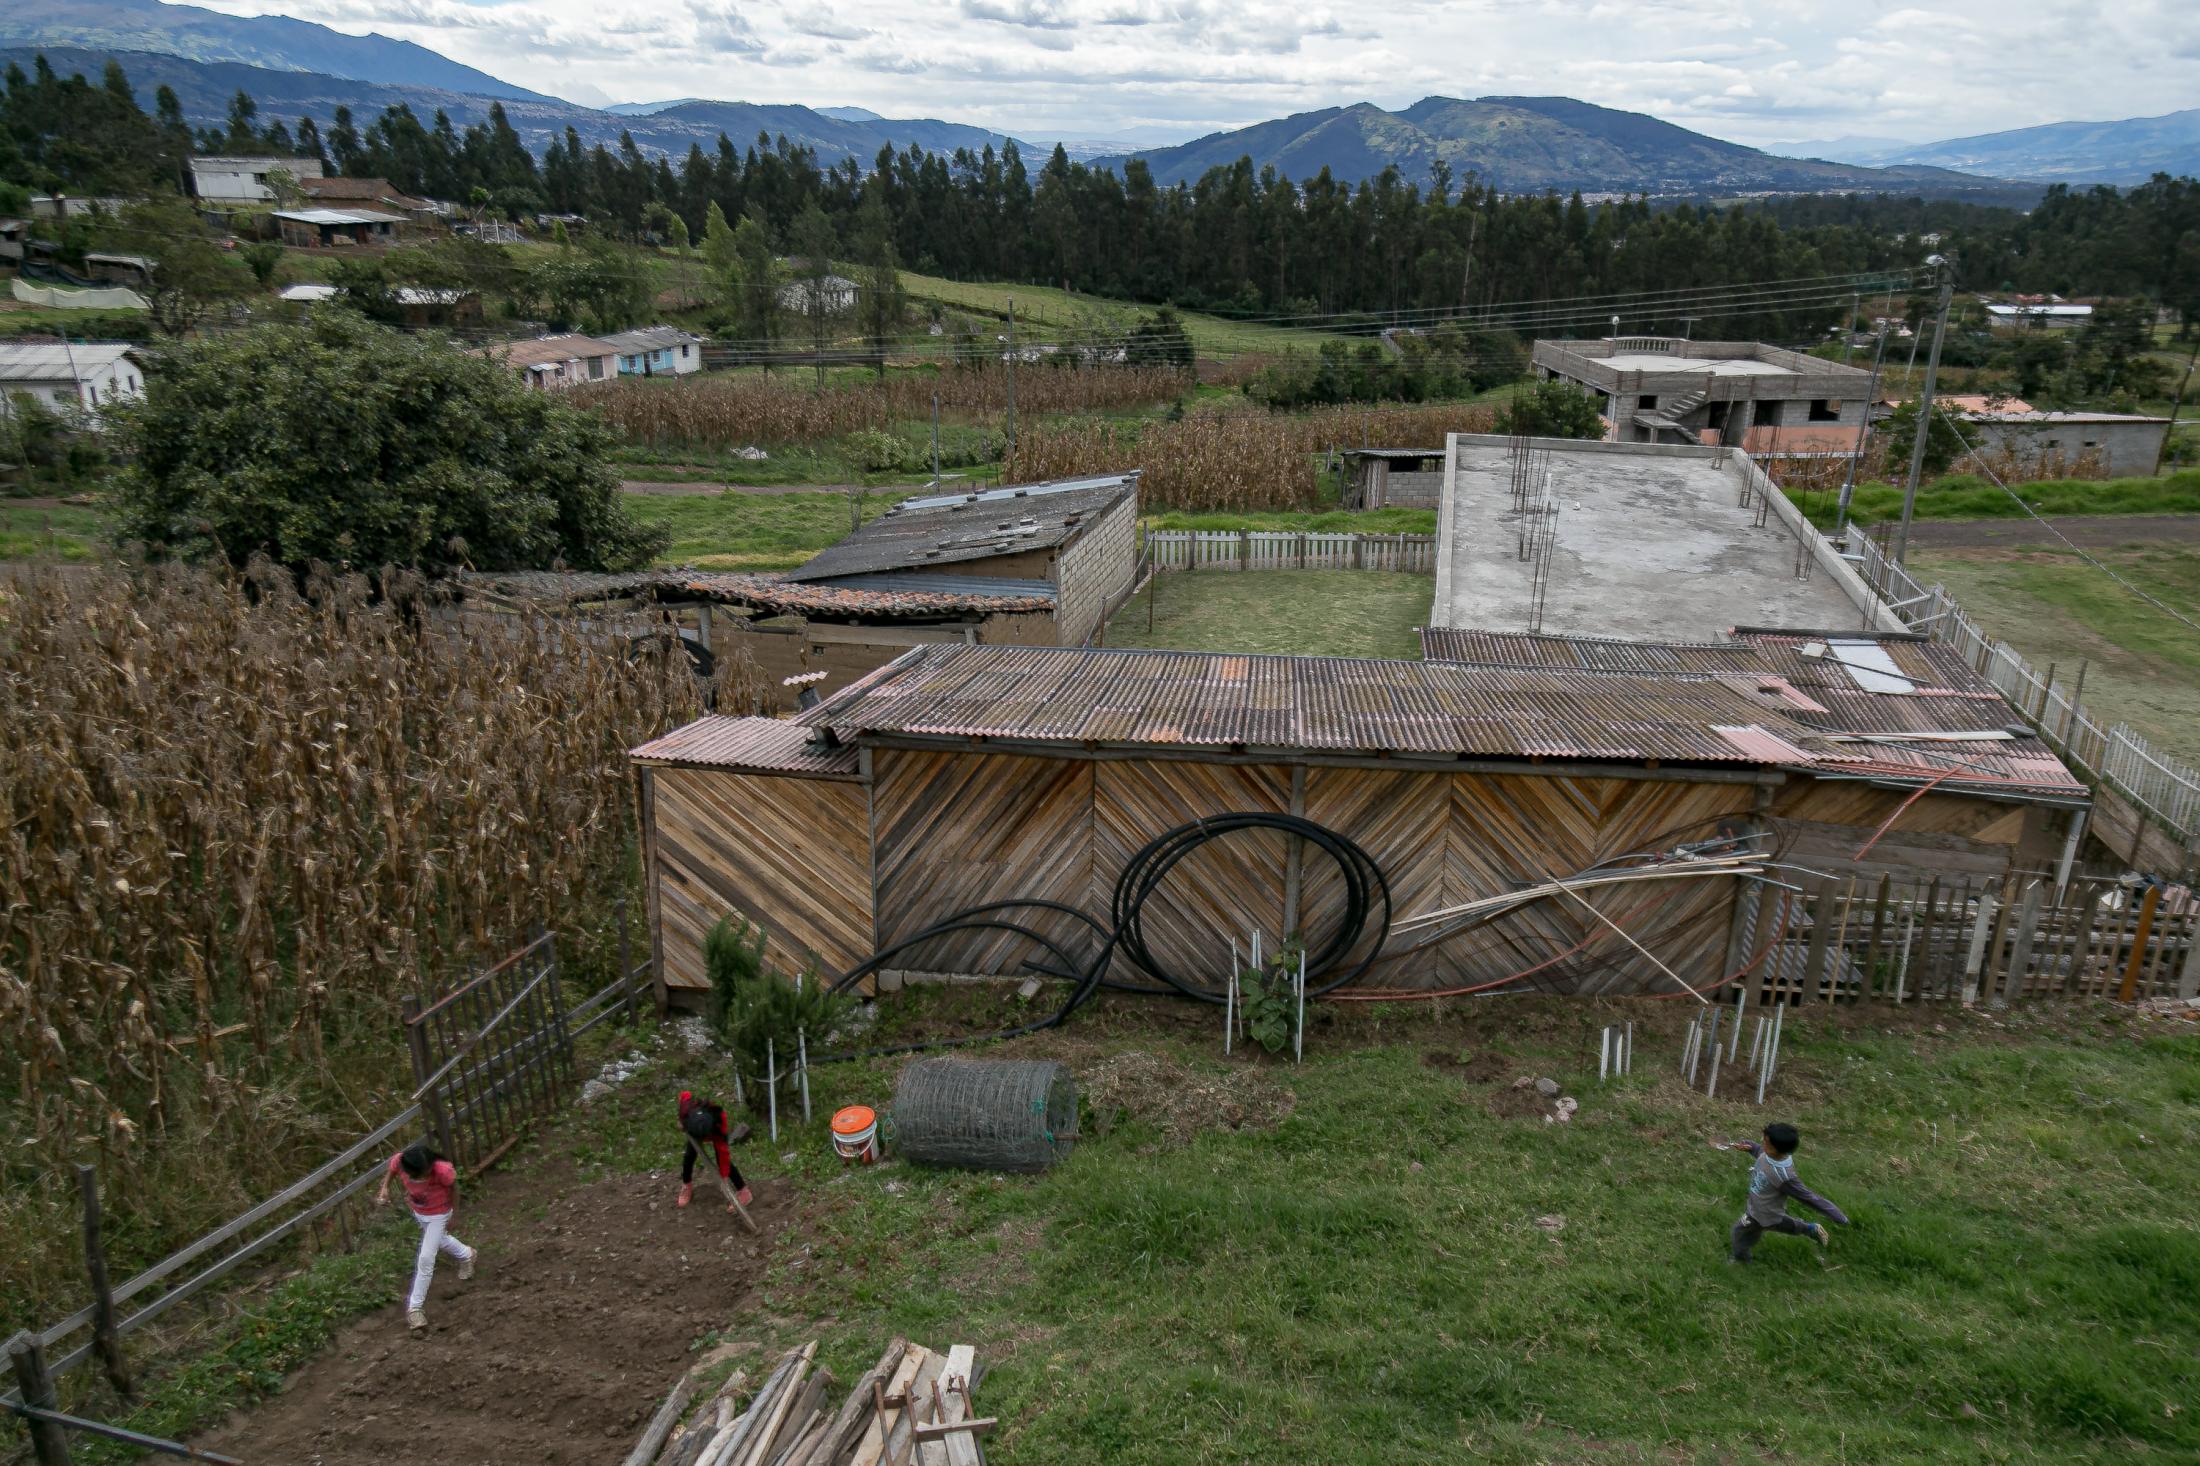 Sofia Andrade (11), Sarah&iacute; Andrade (9) and Angelo Andrade (7) play in the fields of their home located in Patagua, one of the most remote neighborhoods of the rural parish of Cotogchoa. May 22nd, 2020. Cotogchoa-Ecuador. Andr&eacute;s Y&eacute;pez.&nbsp; Daily life in rural areas has been affected differently than in urban areas. Their confinement is not limited to being indoors. The countryside is part of their home.